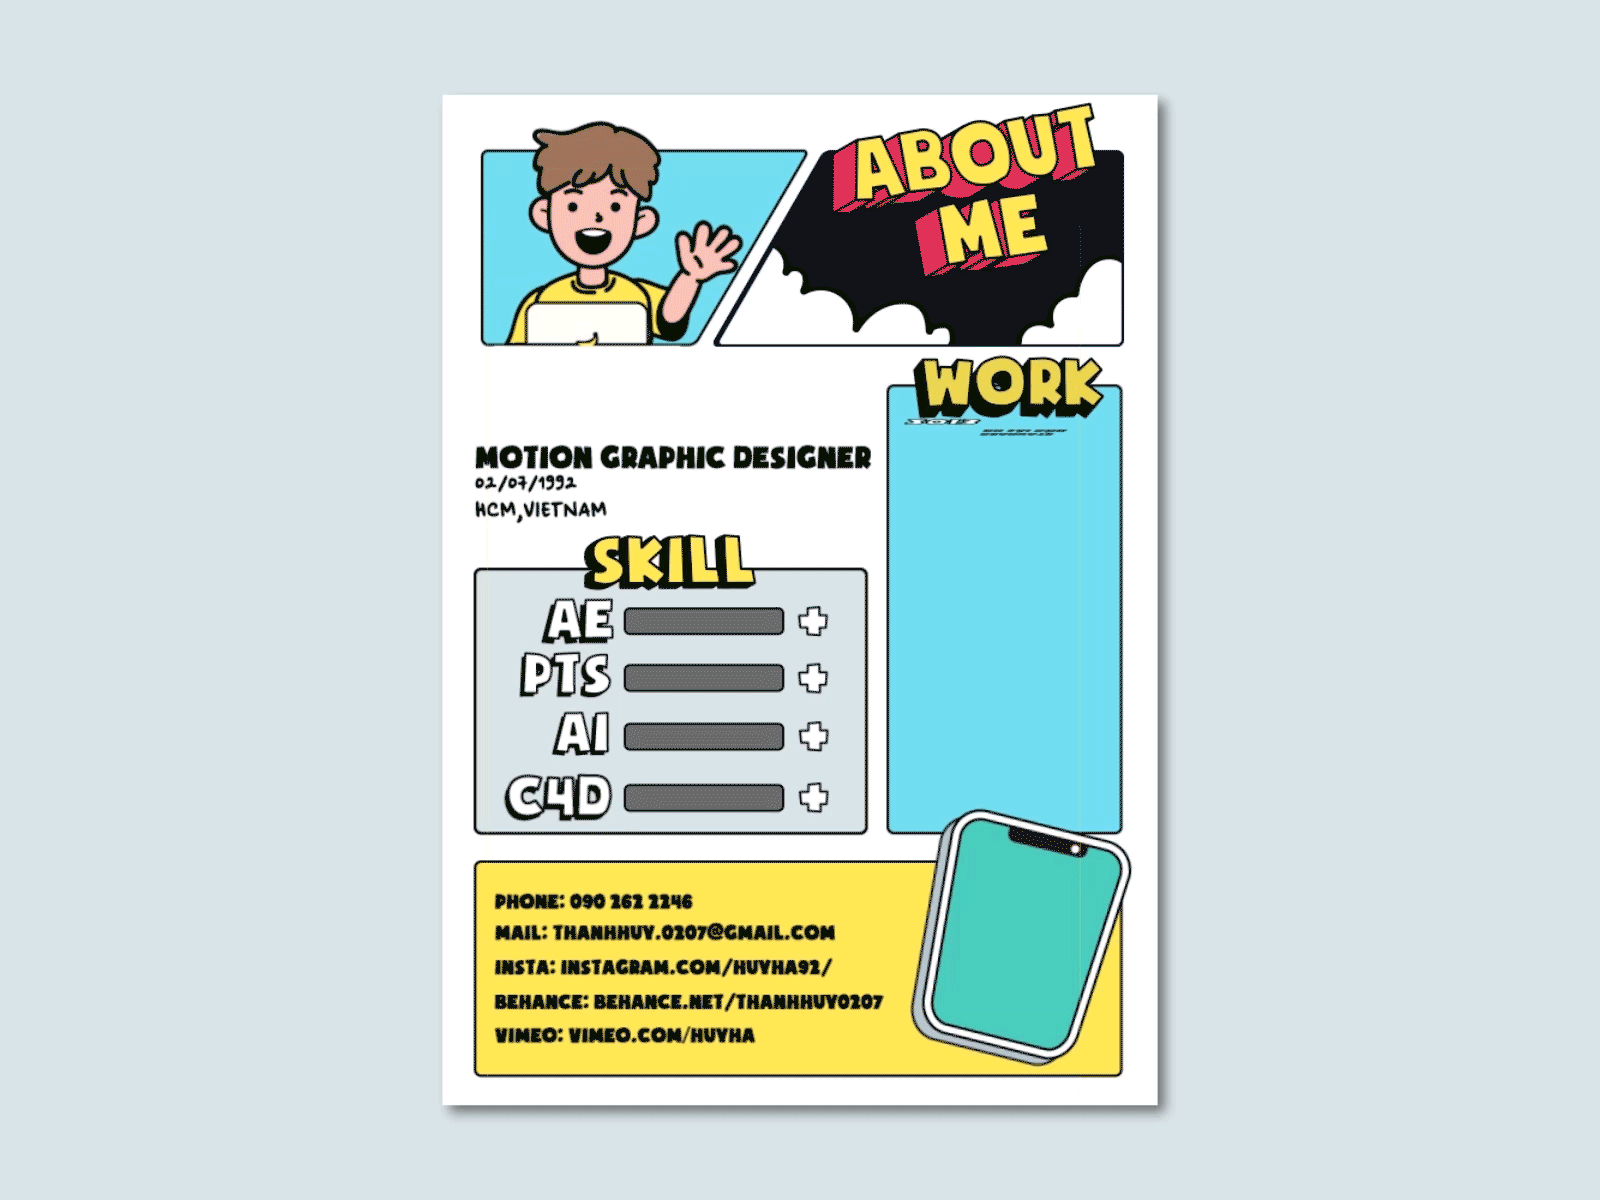 Personal Resume/CV by Thanh Huy on Dribbble